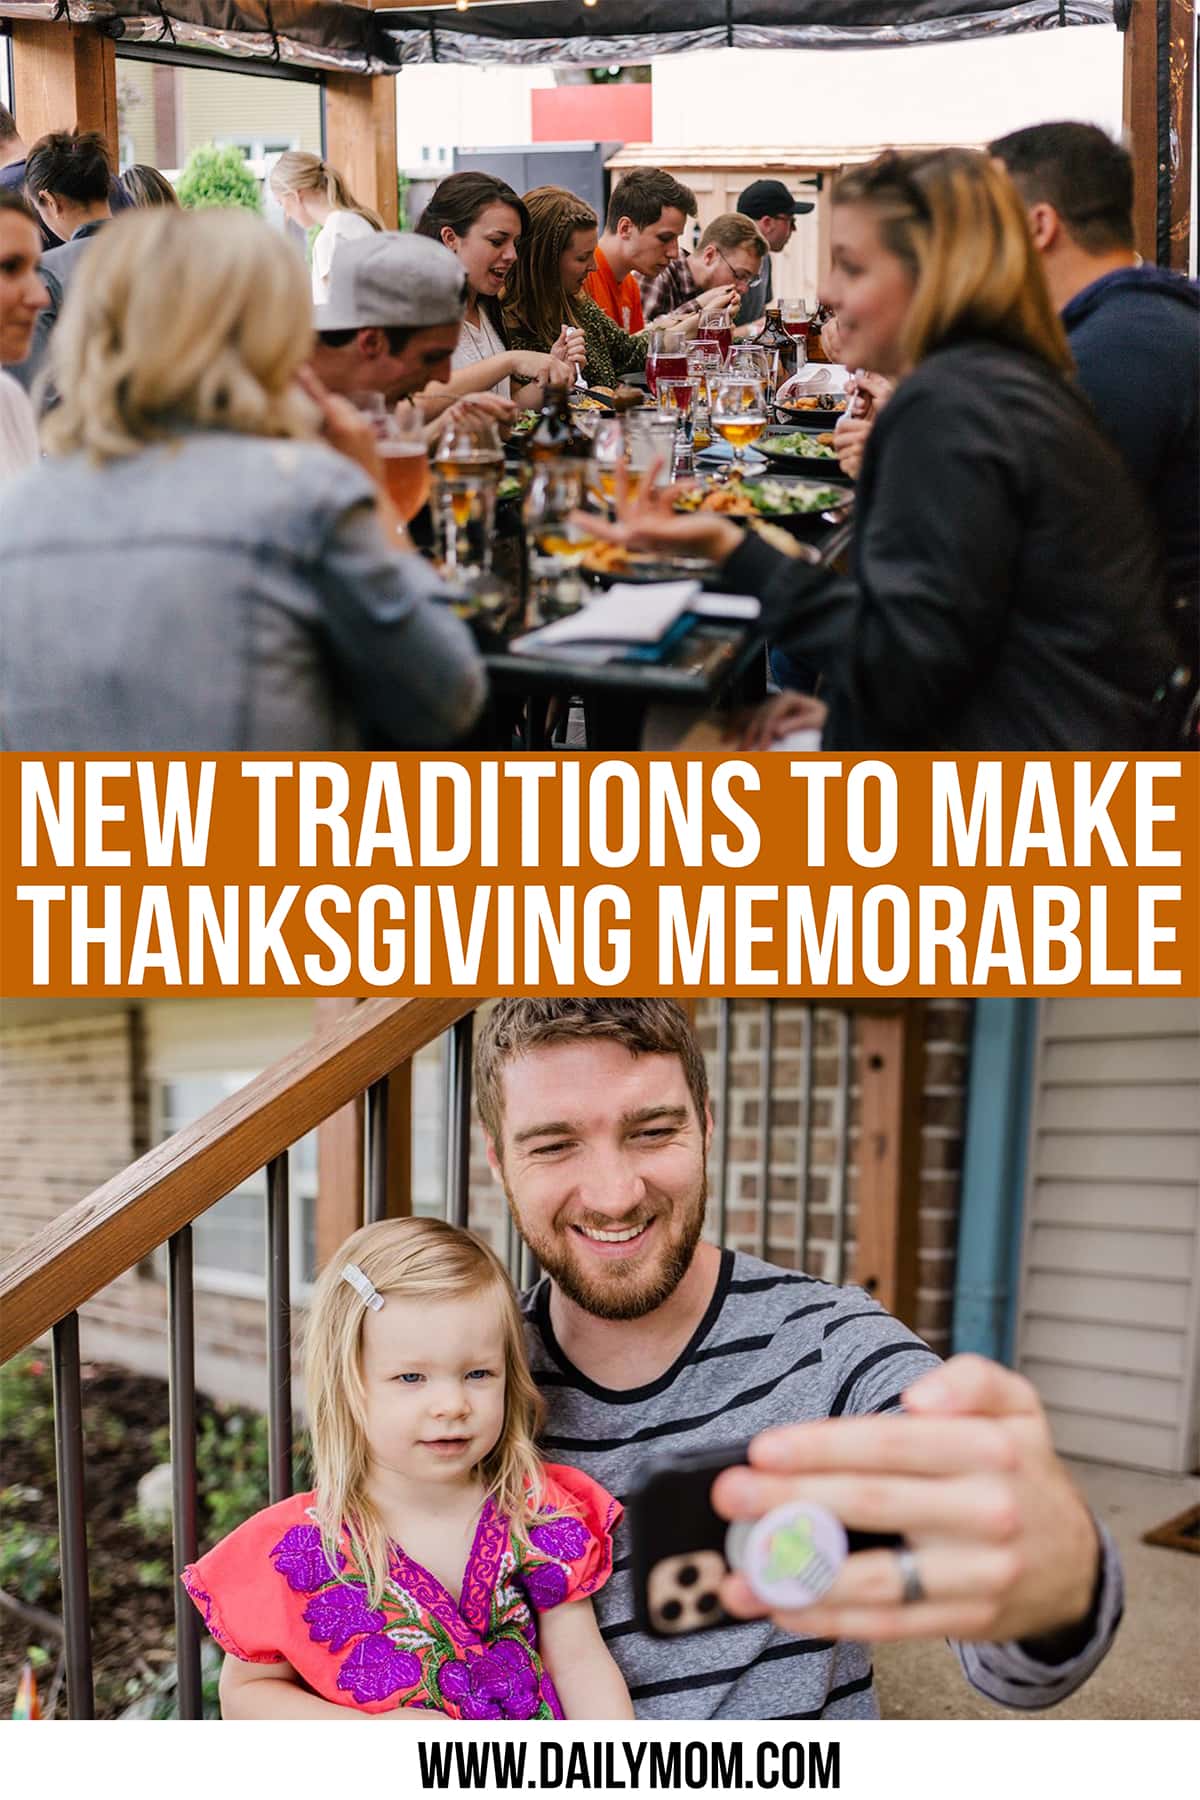 7 New Traditions To Make Thanksgiving Memorable